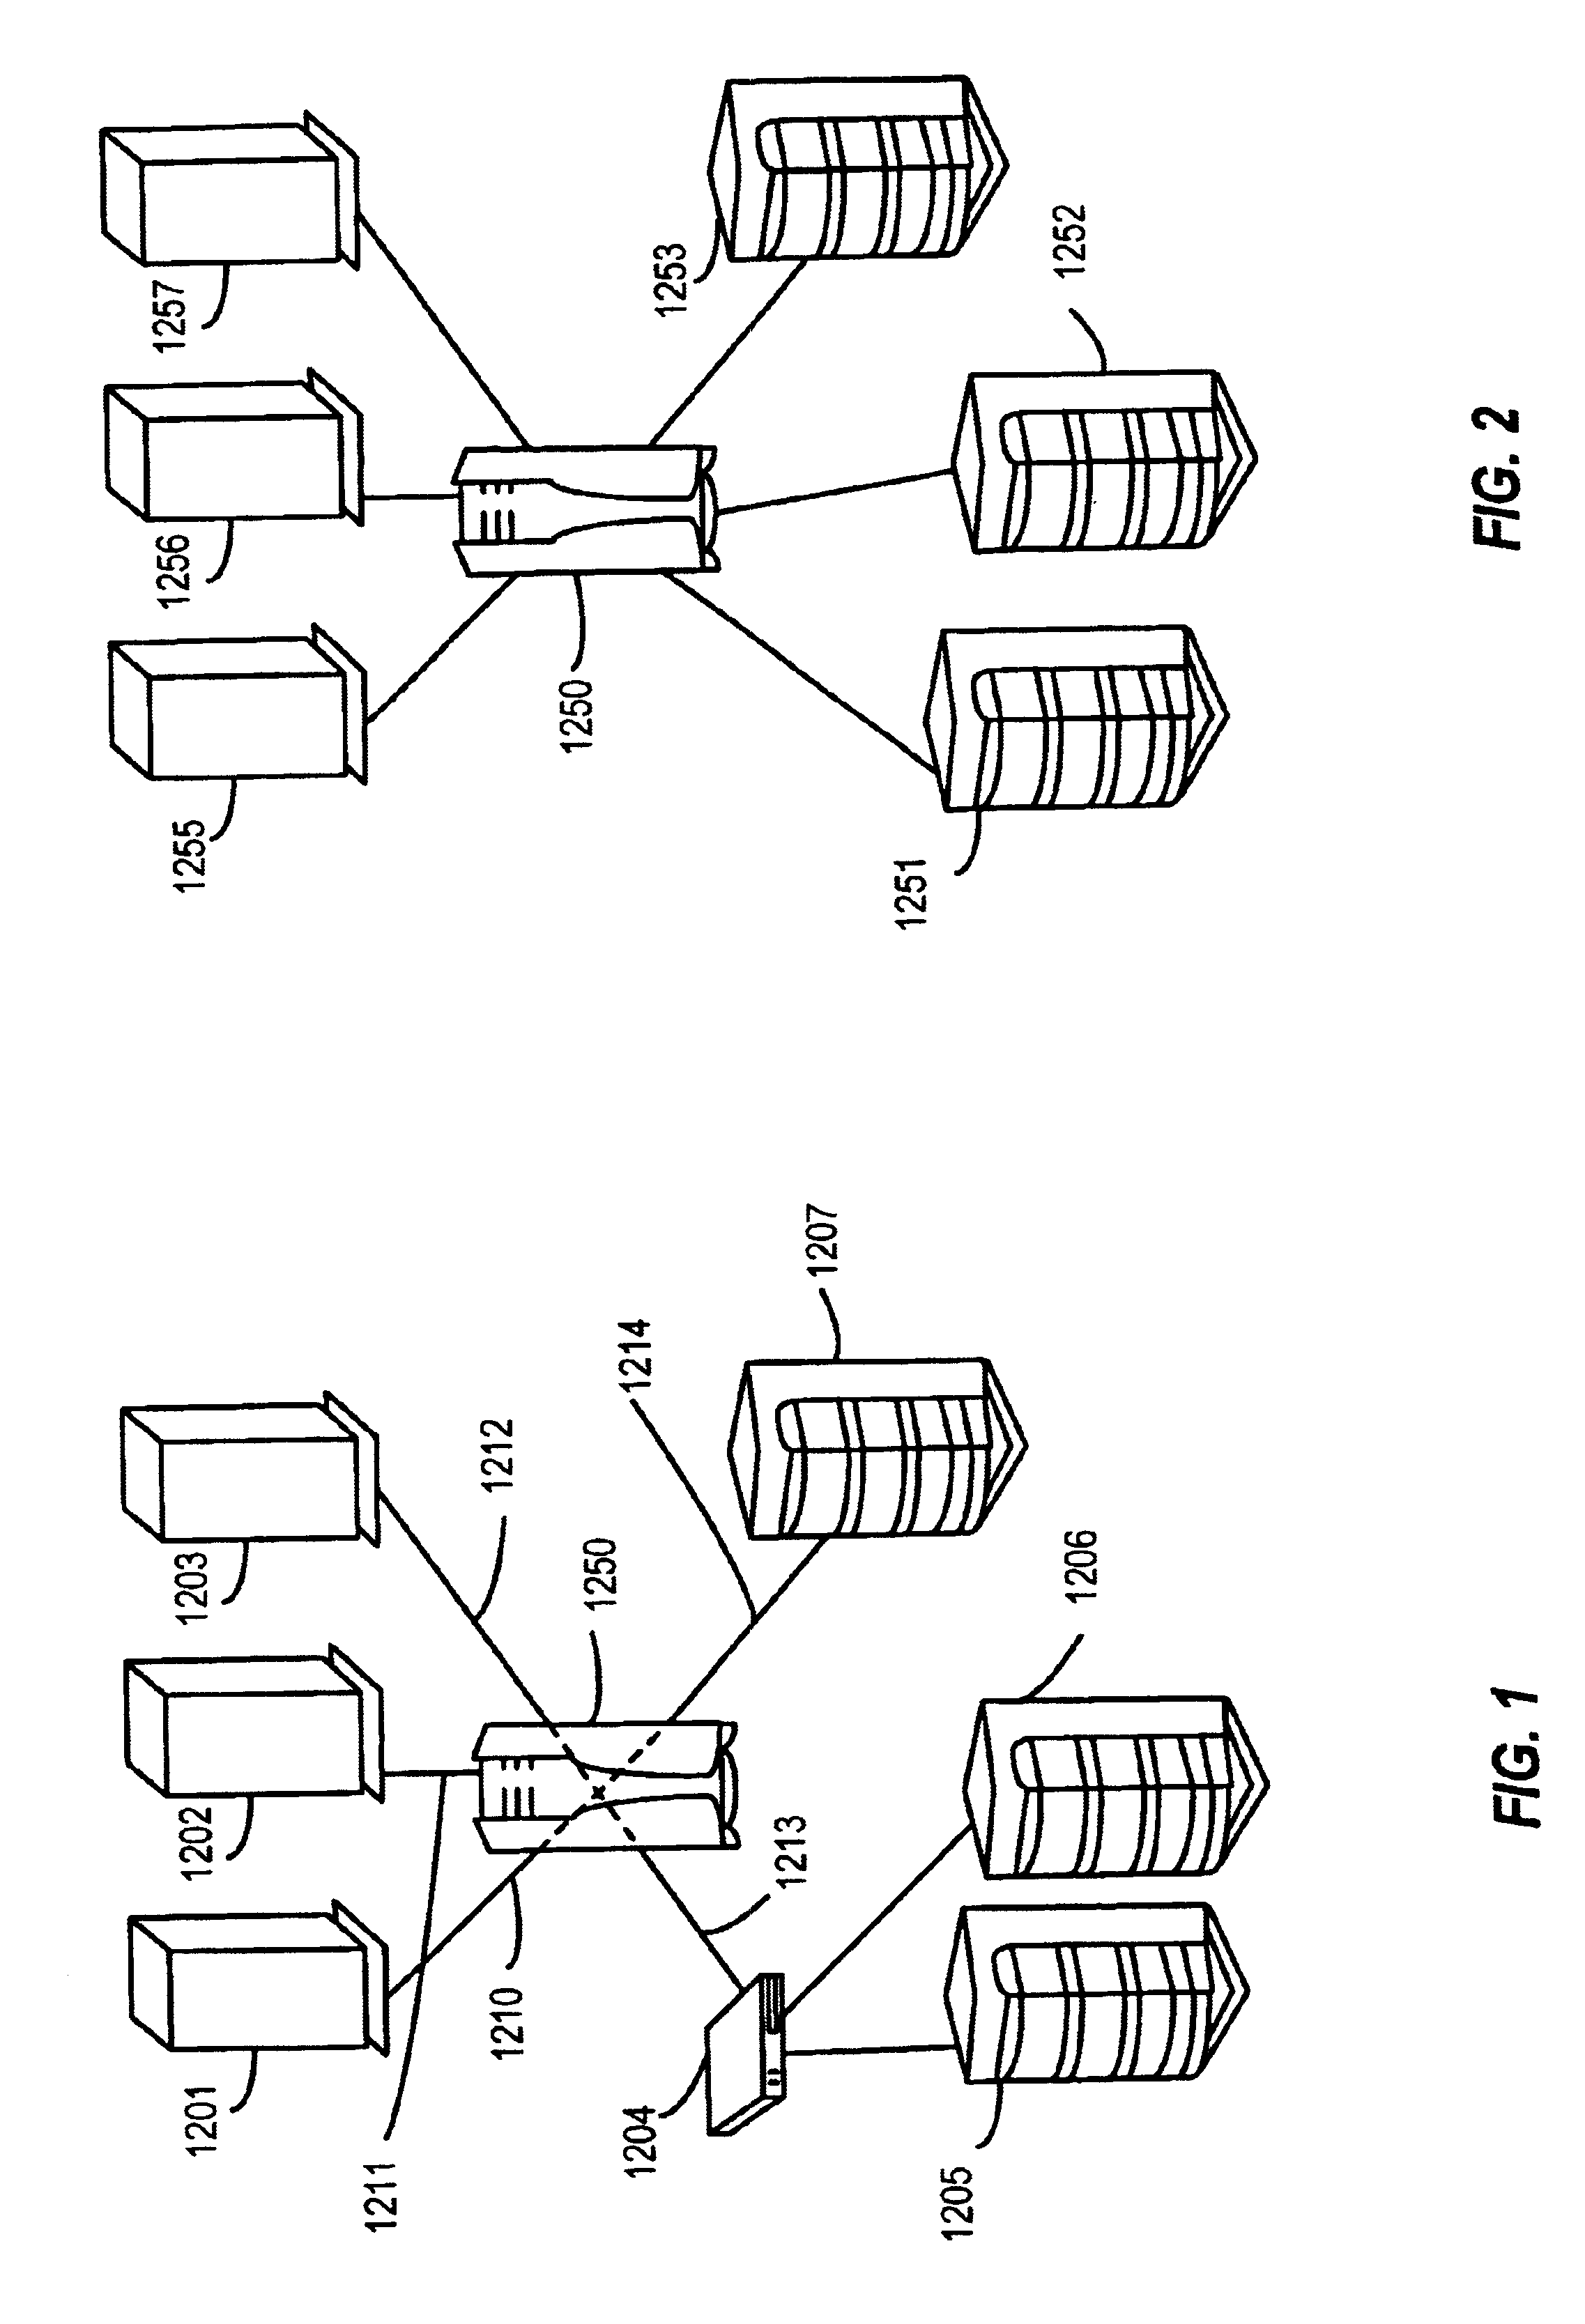 Method for configuration and management of storage resources in a storage network